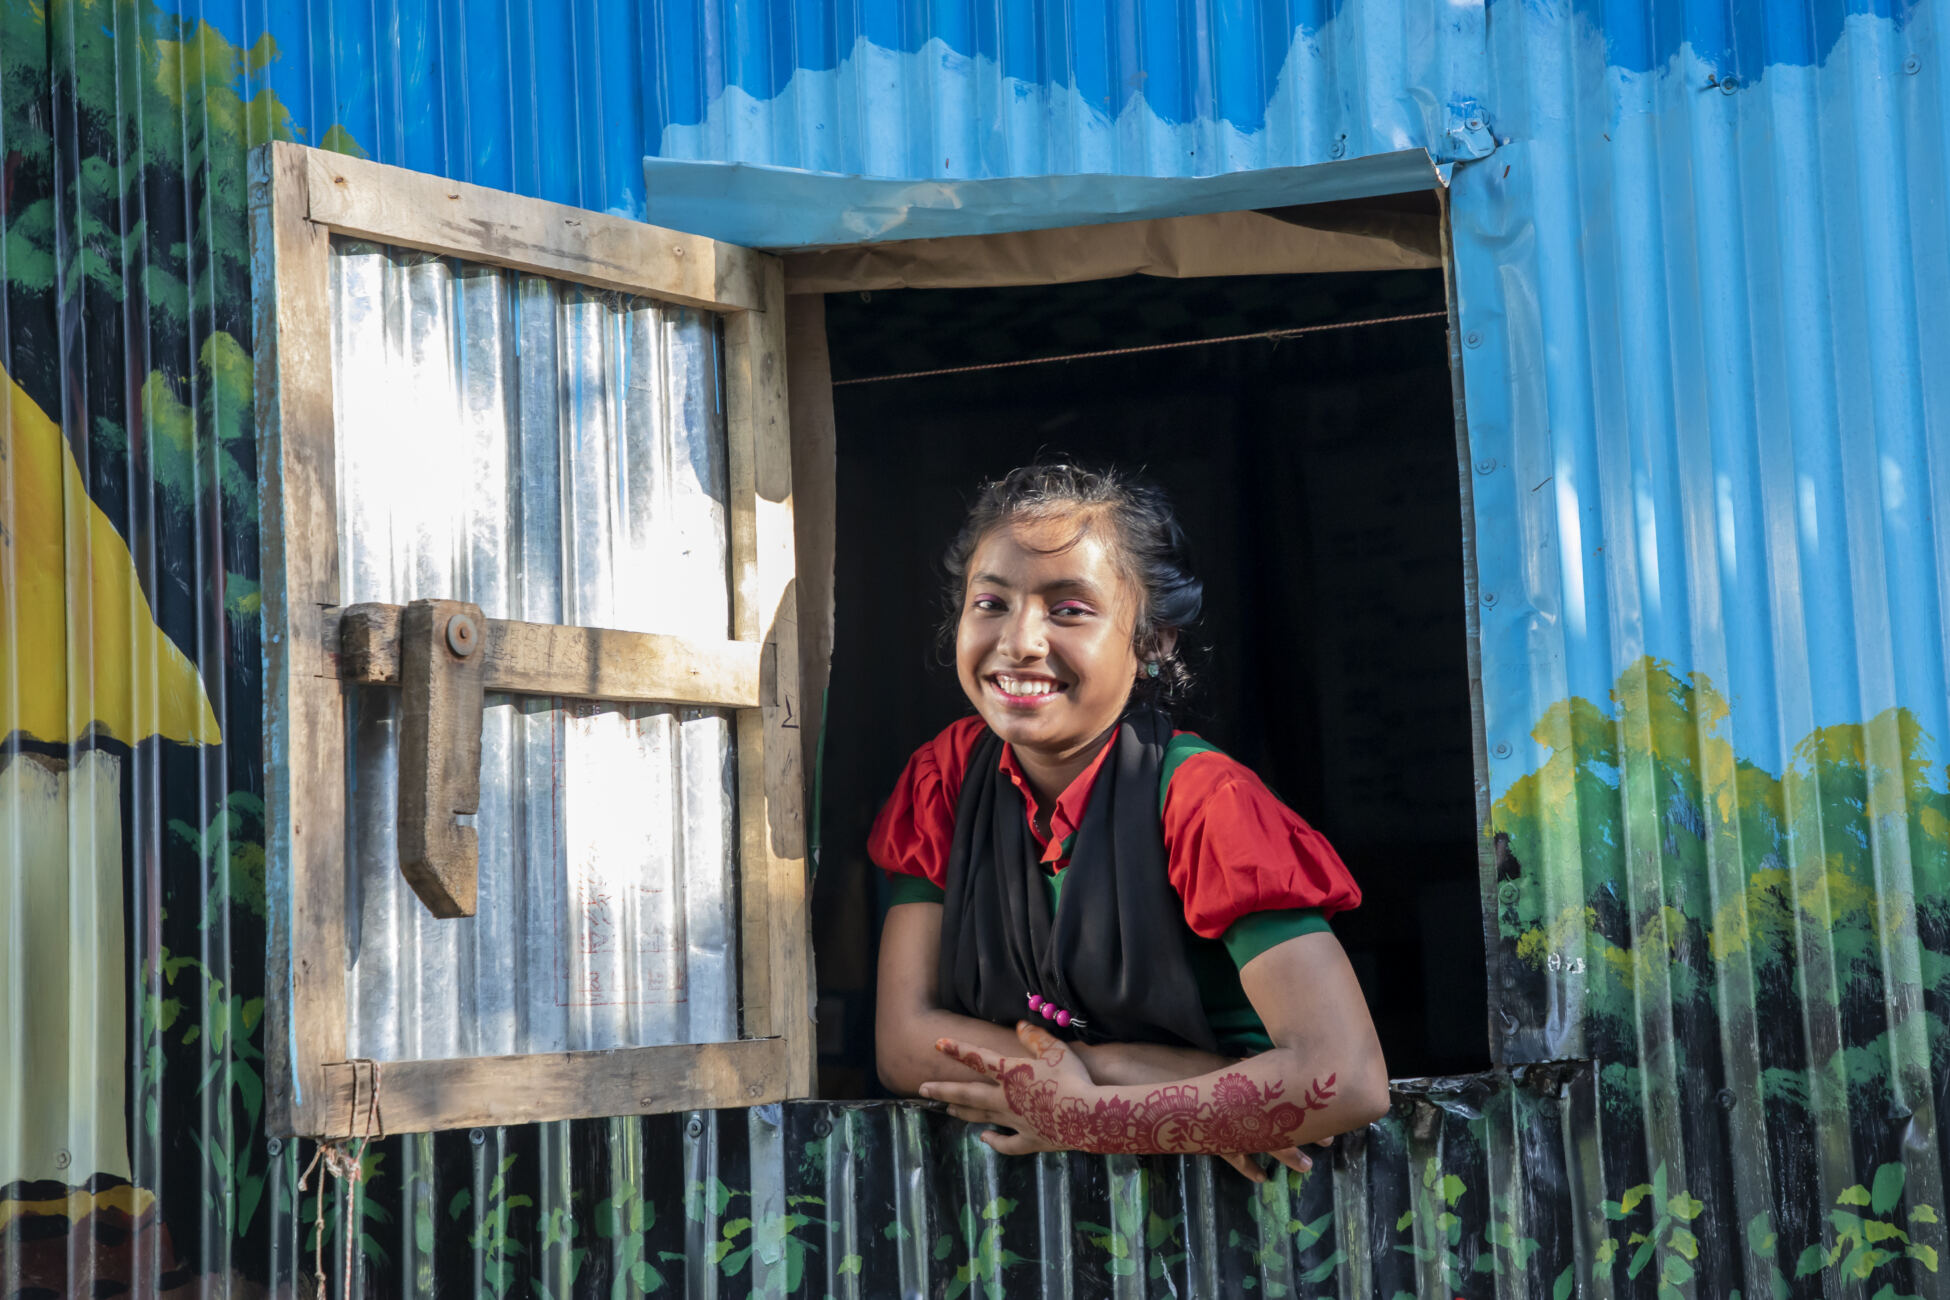 A 15 year old girl smiles out of a classroom window in Sylhet, Bangladesh.